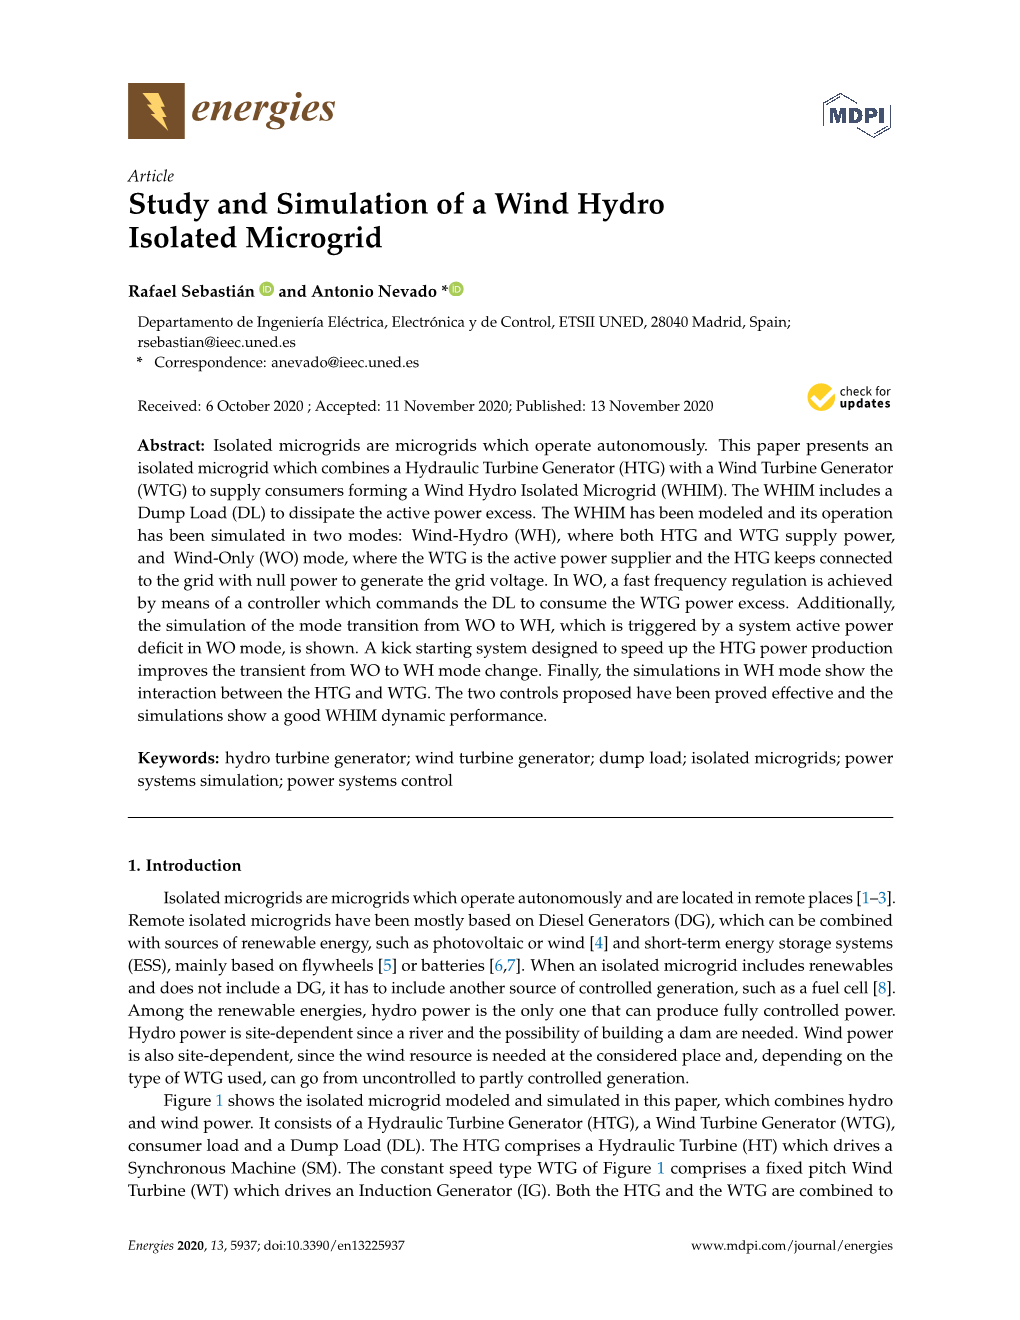 Study and Simulation of a Wind Hydro Isolated Microgrid